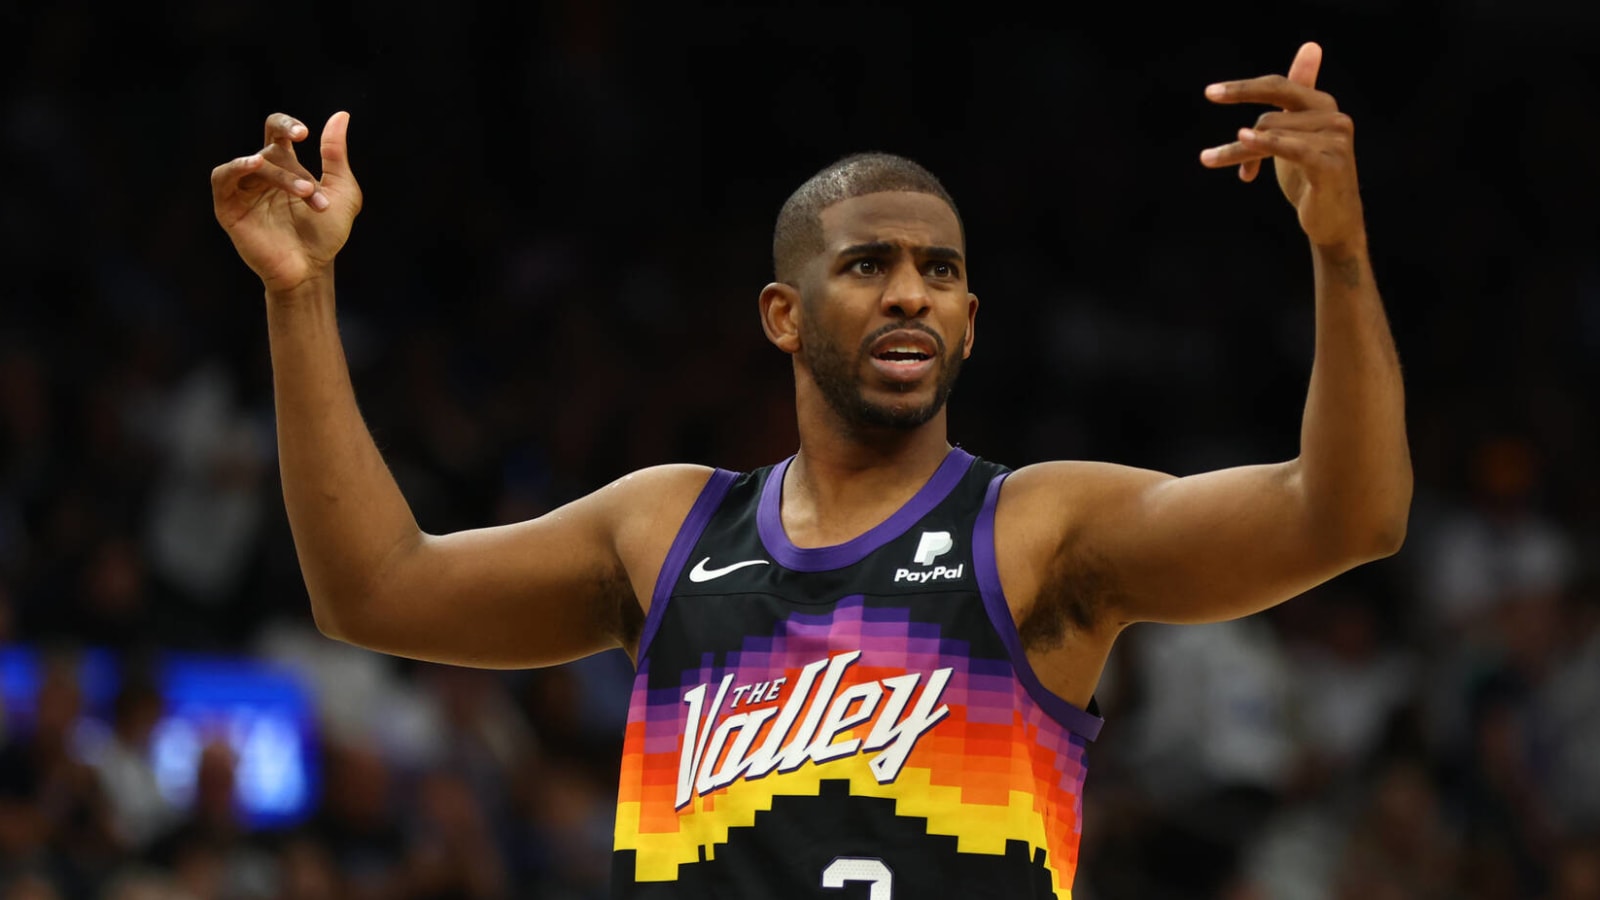 Chris Paul wants to join ownership group after playing